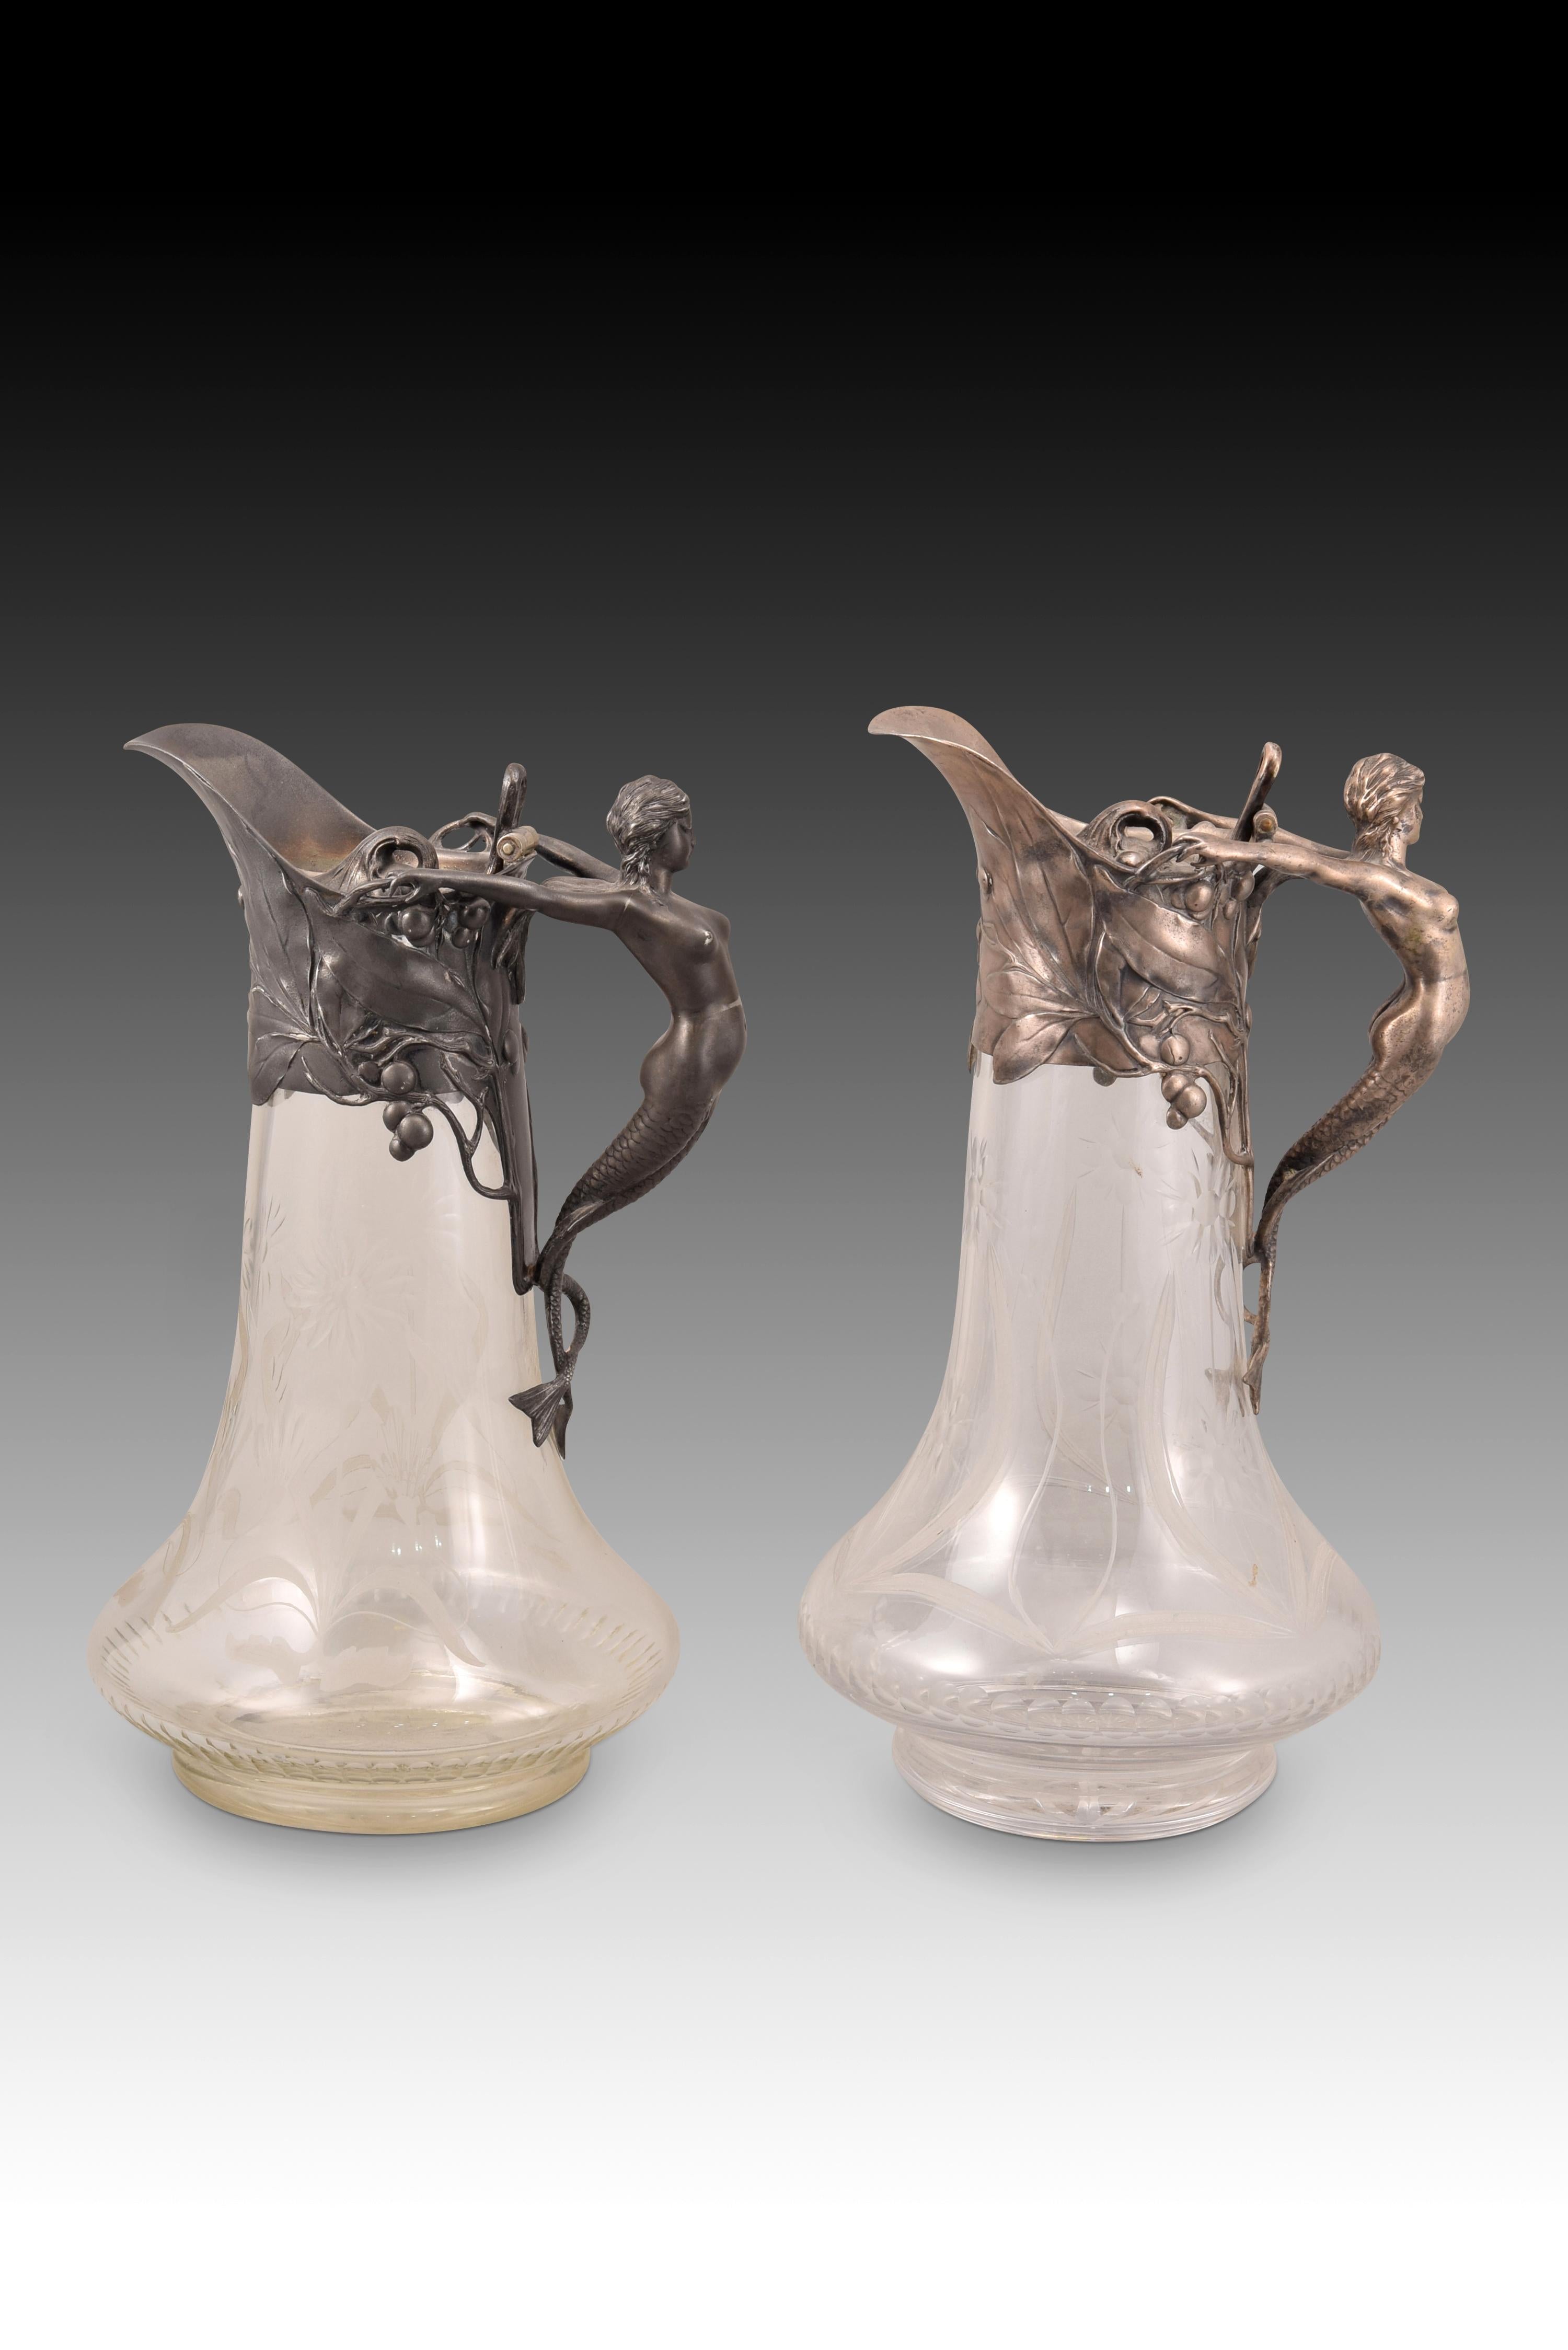 Early 20th Century Pair of Modernist Jugs, Pewter, Cut Glass, WMF, Germany, 1903